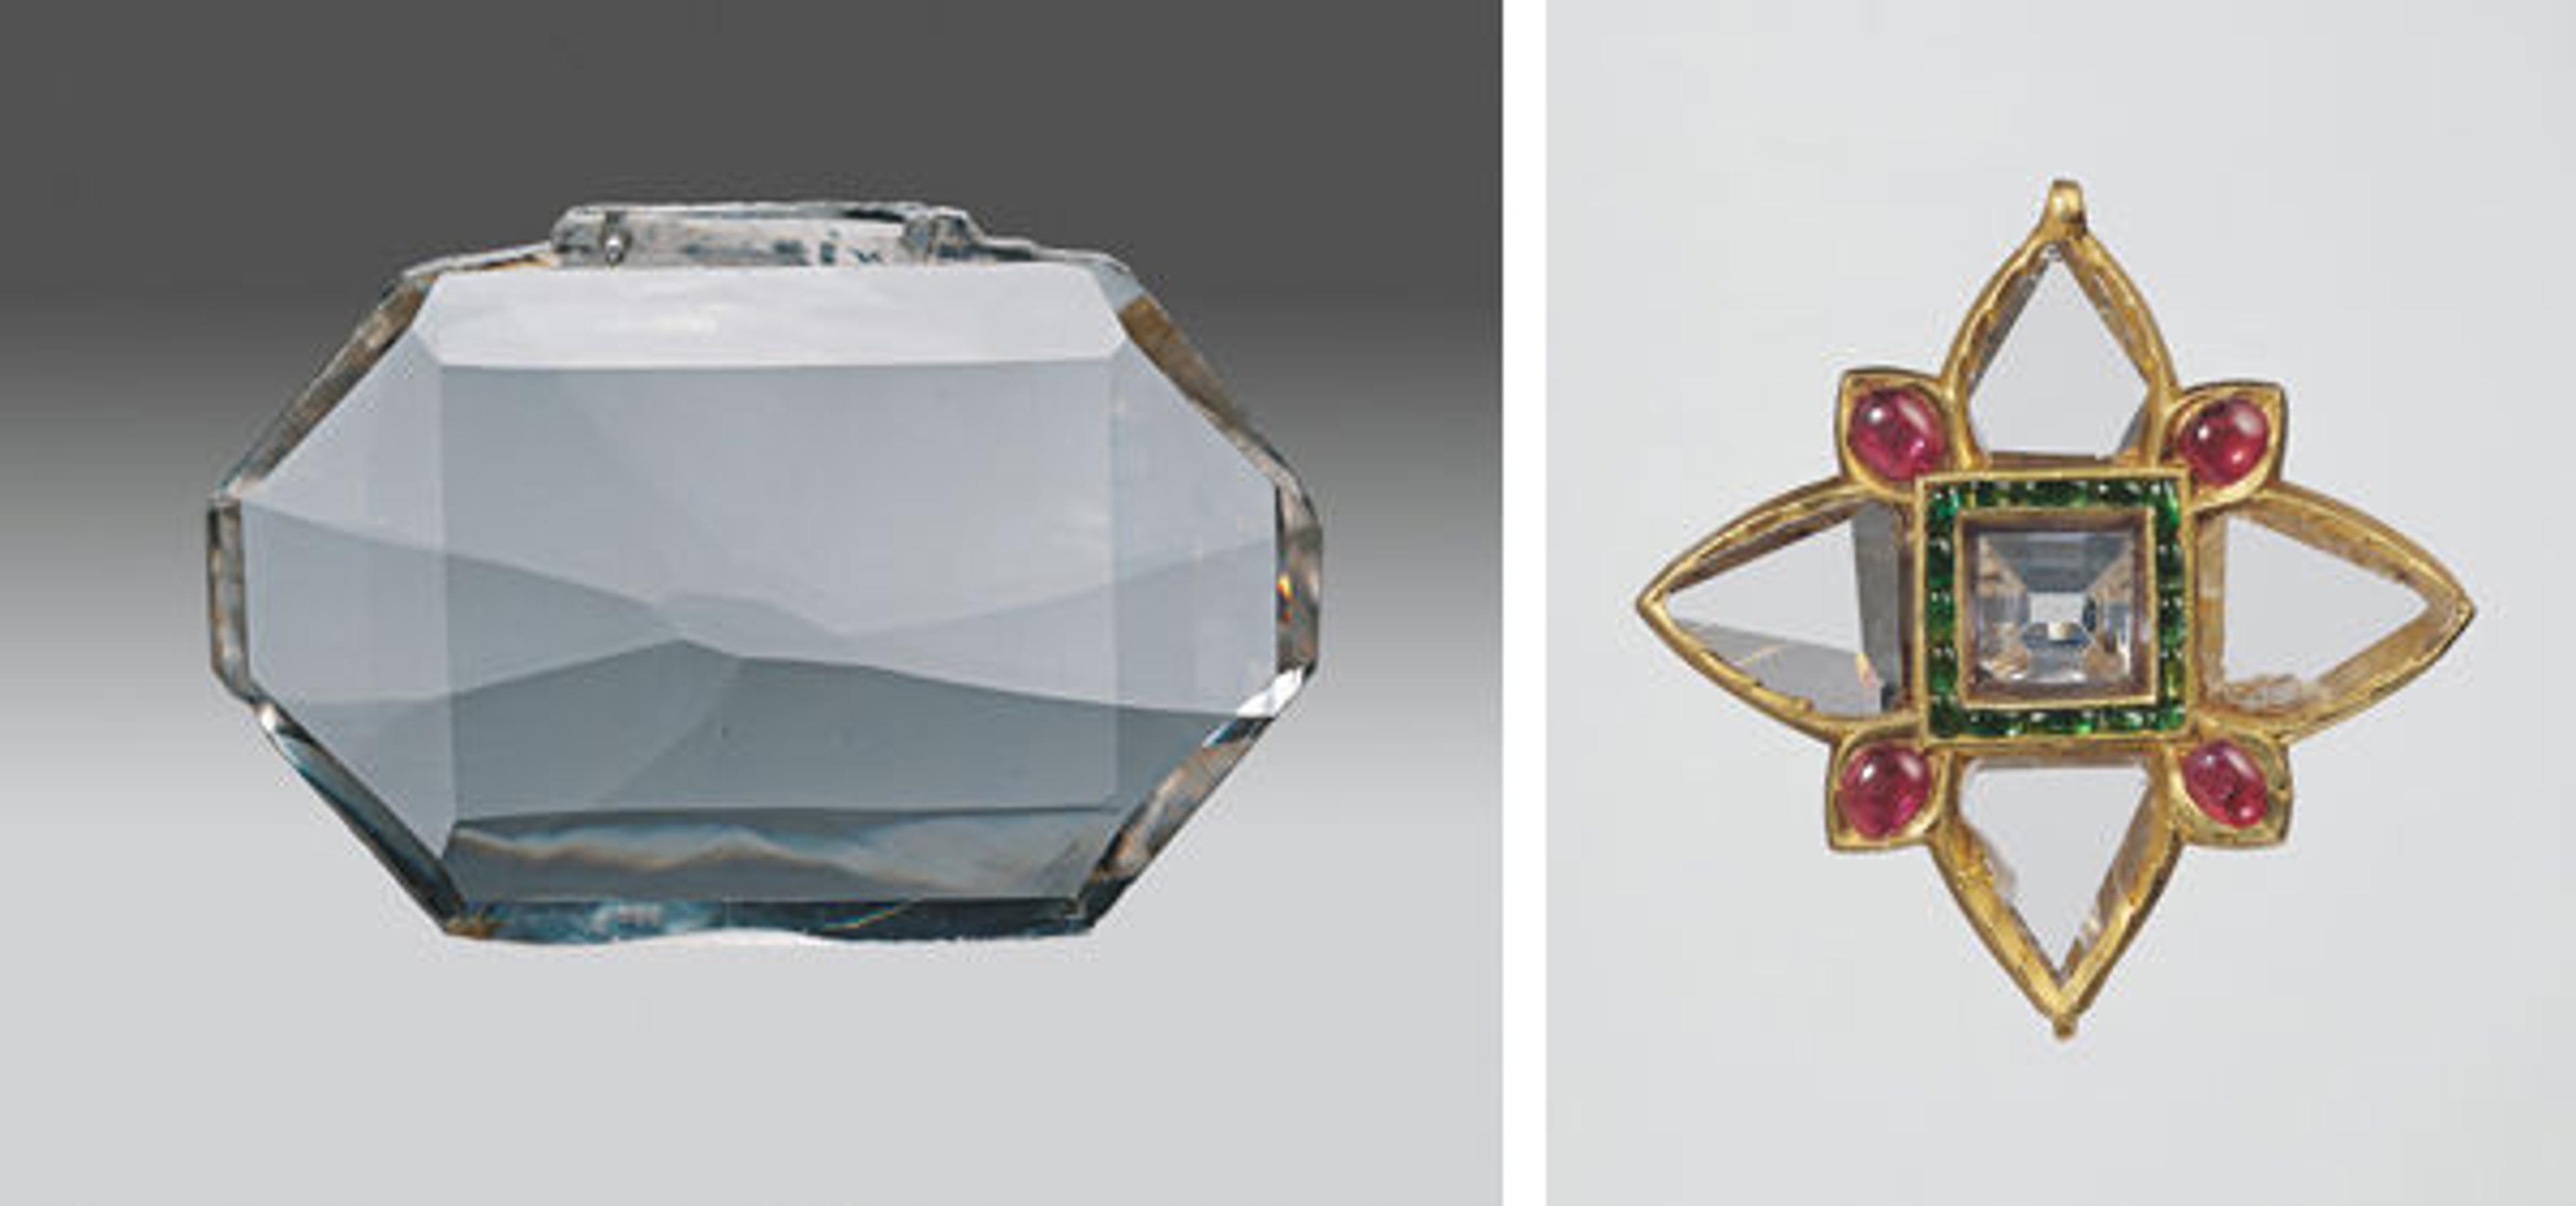 Left: Shah Jahan diamond, 17th century. Islamic. 56.72 carats. The al-Sabah Collection, Dar al-Athar al-Islamiyyah, Kuwait. Right: Quatrefoil pendant, first quarter 17th century. Islamic. Fabricated from gold; worked in kundan technique and set with diamonds, rubies and emeralds. The al-Sabah Collection, Dar al-Athar al-Islamiyyah, Kuwait